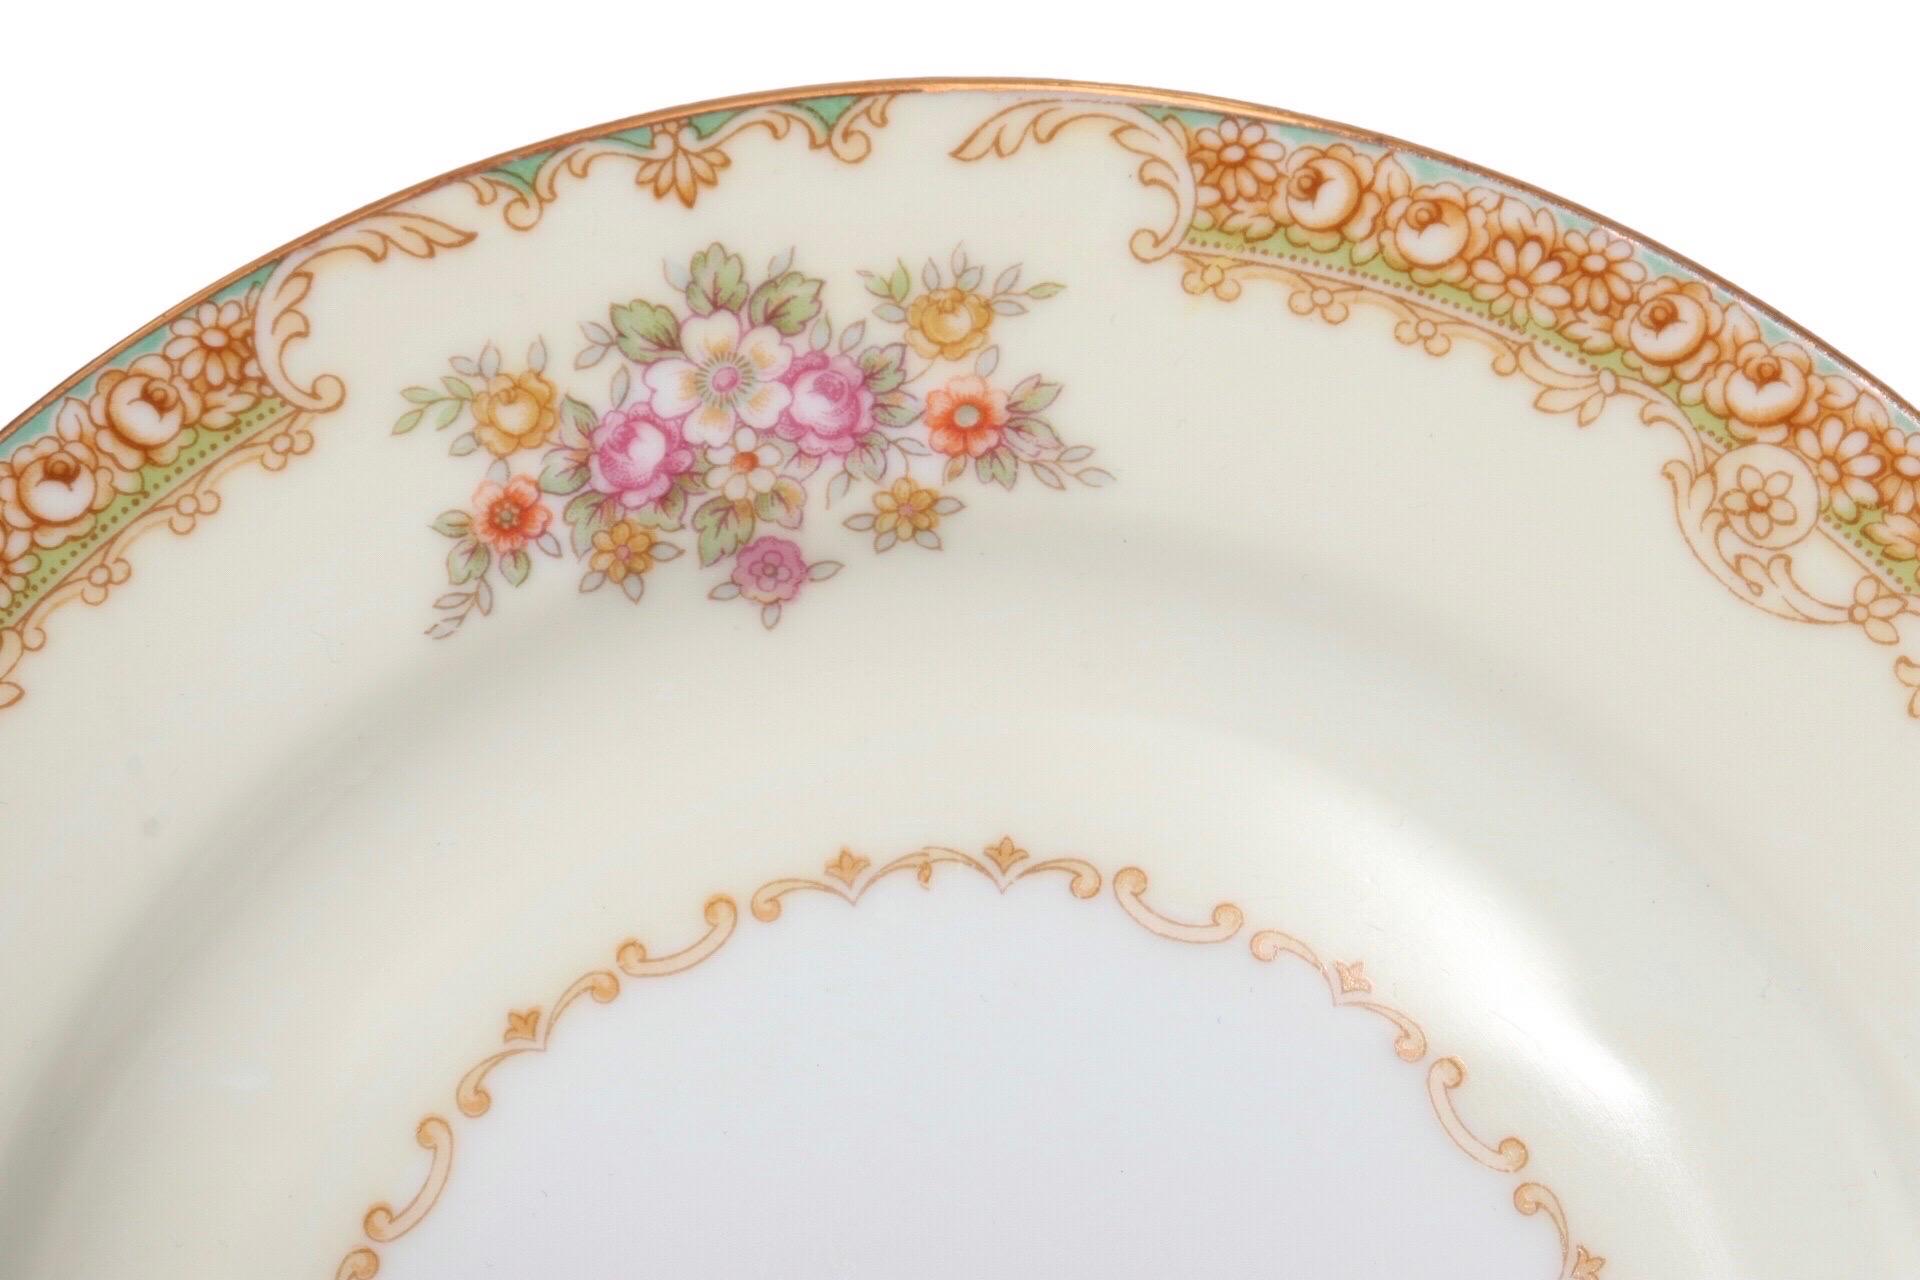 A set of twelve Japanese dinner and side plates made by Noritake in their N134 pattern, which was discontinued circa 1940. An elaborate border is hand painted with peonies, serpentine scrolls with acanthus trim and interspersed with colorful floral